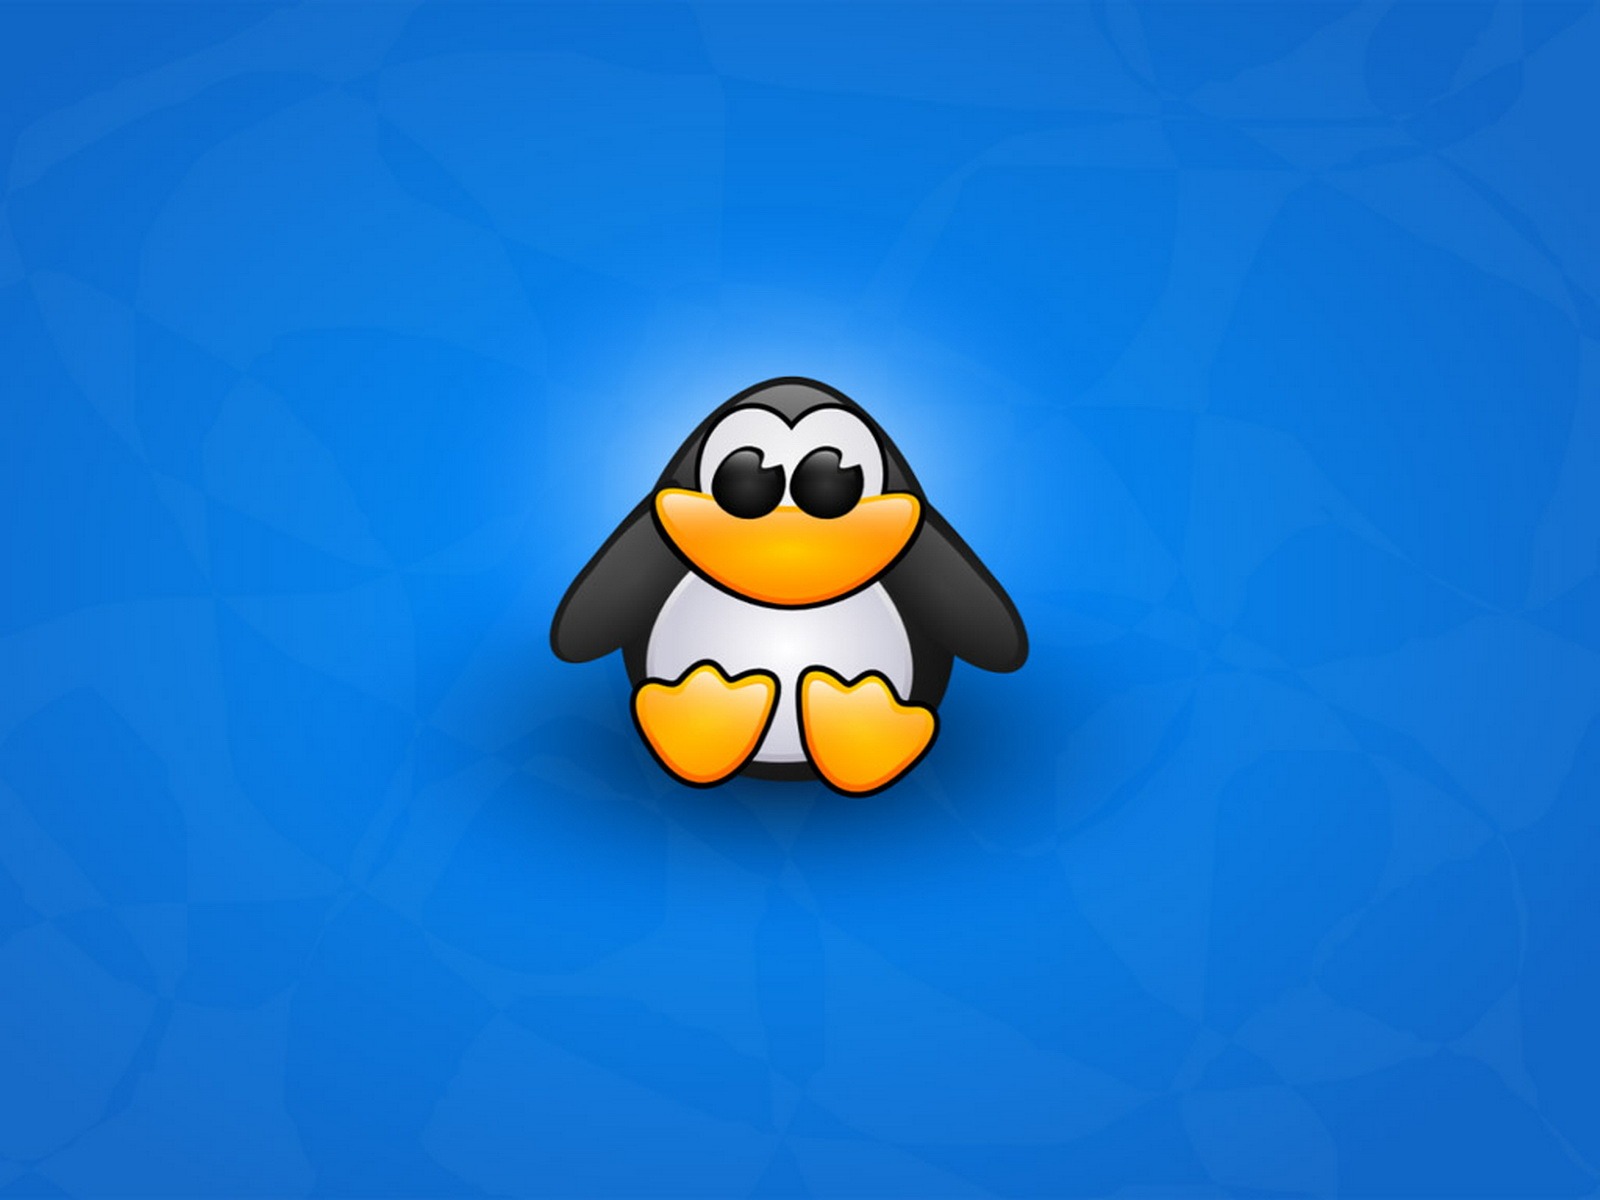 Linux tapety (3) #15 - 1600x1200